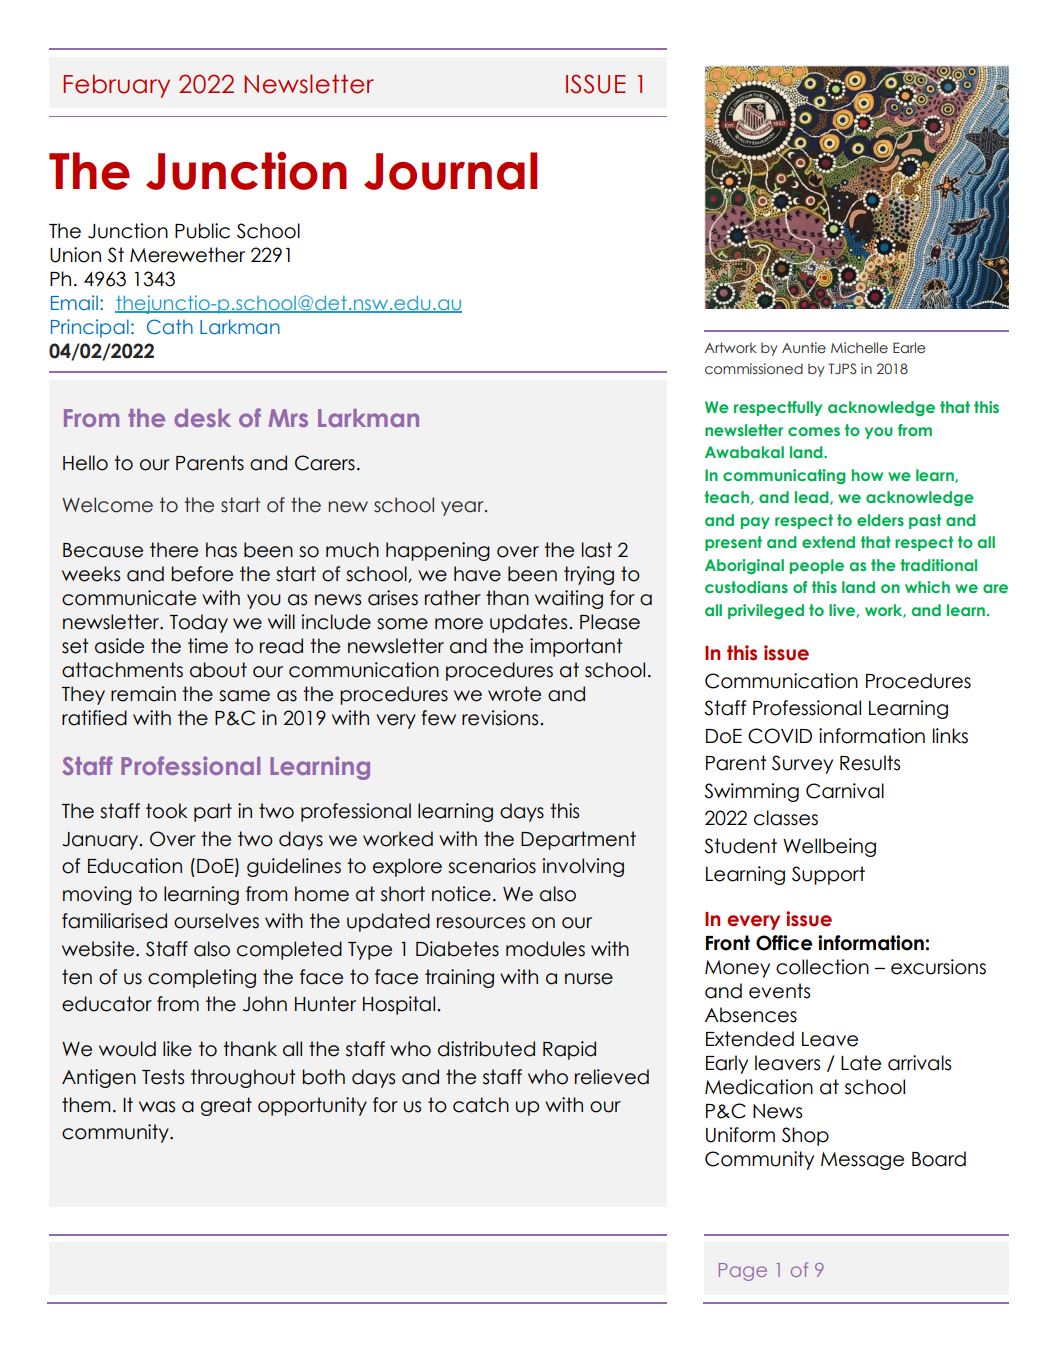 Image of front page of Issue 1